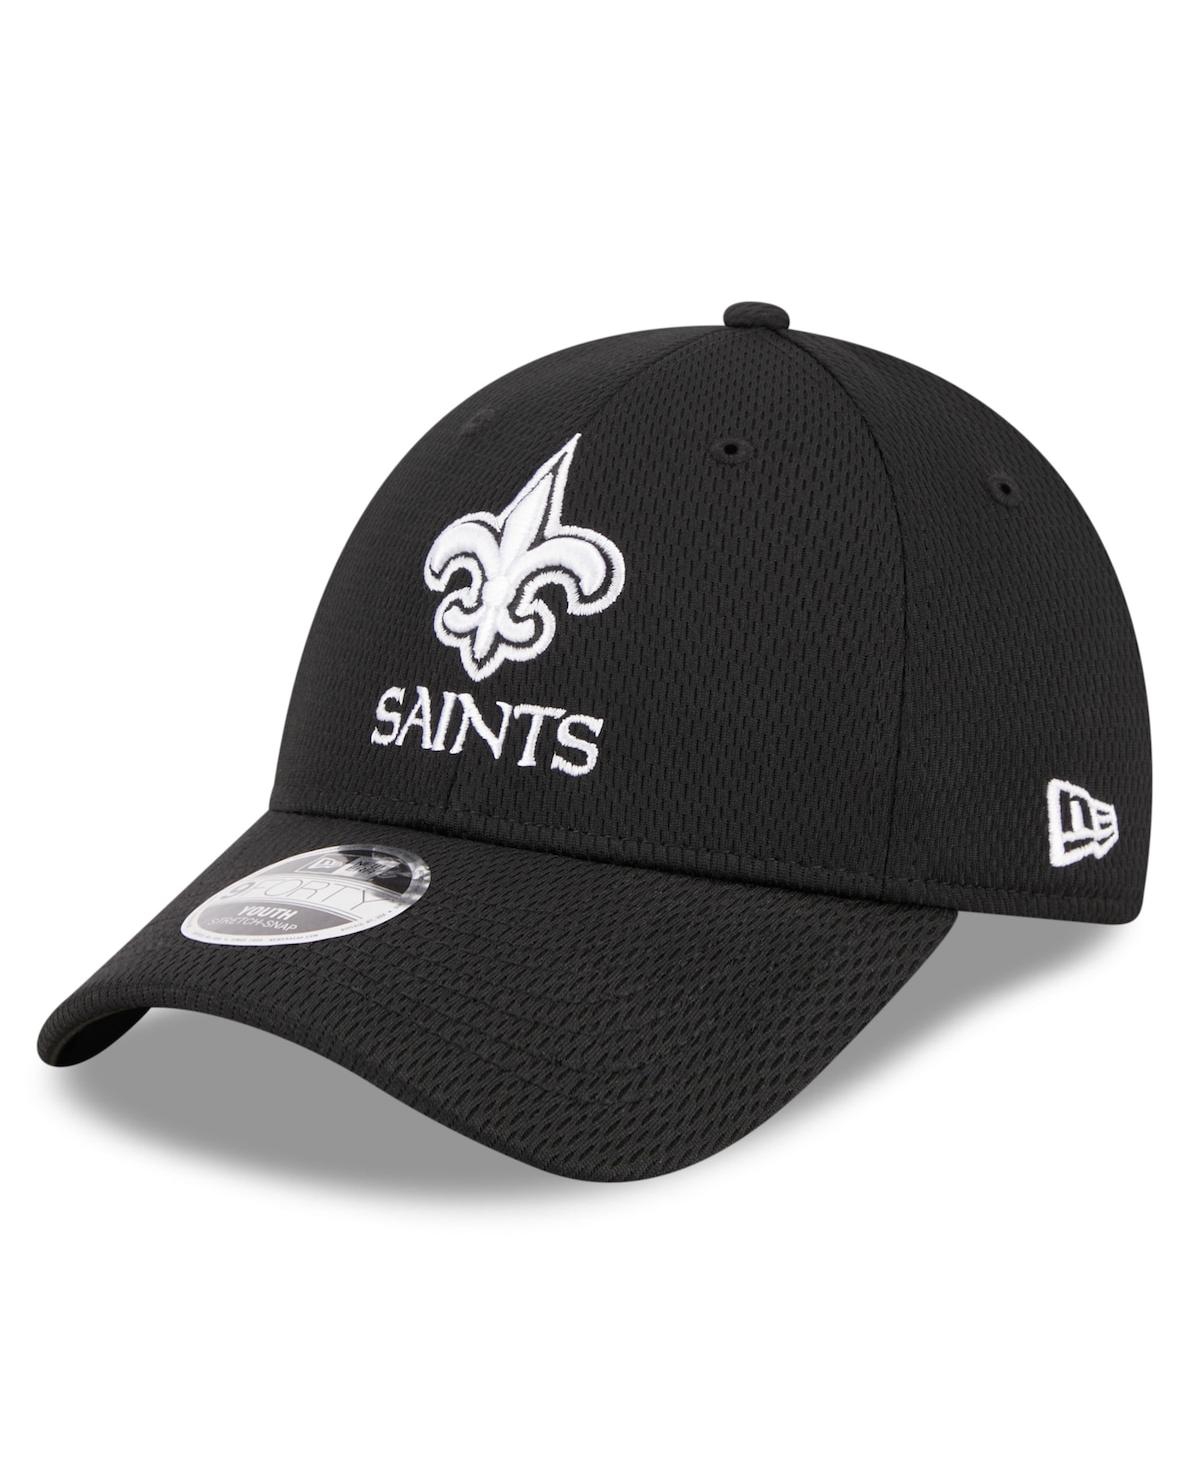 New Era Kids' Youth Boys And Girls  Black New Orleans Saints Main B-dub 9forty Adjustable Hat